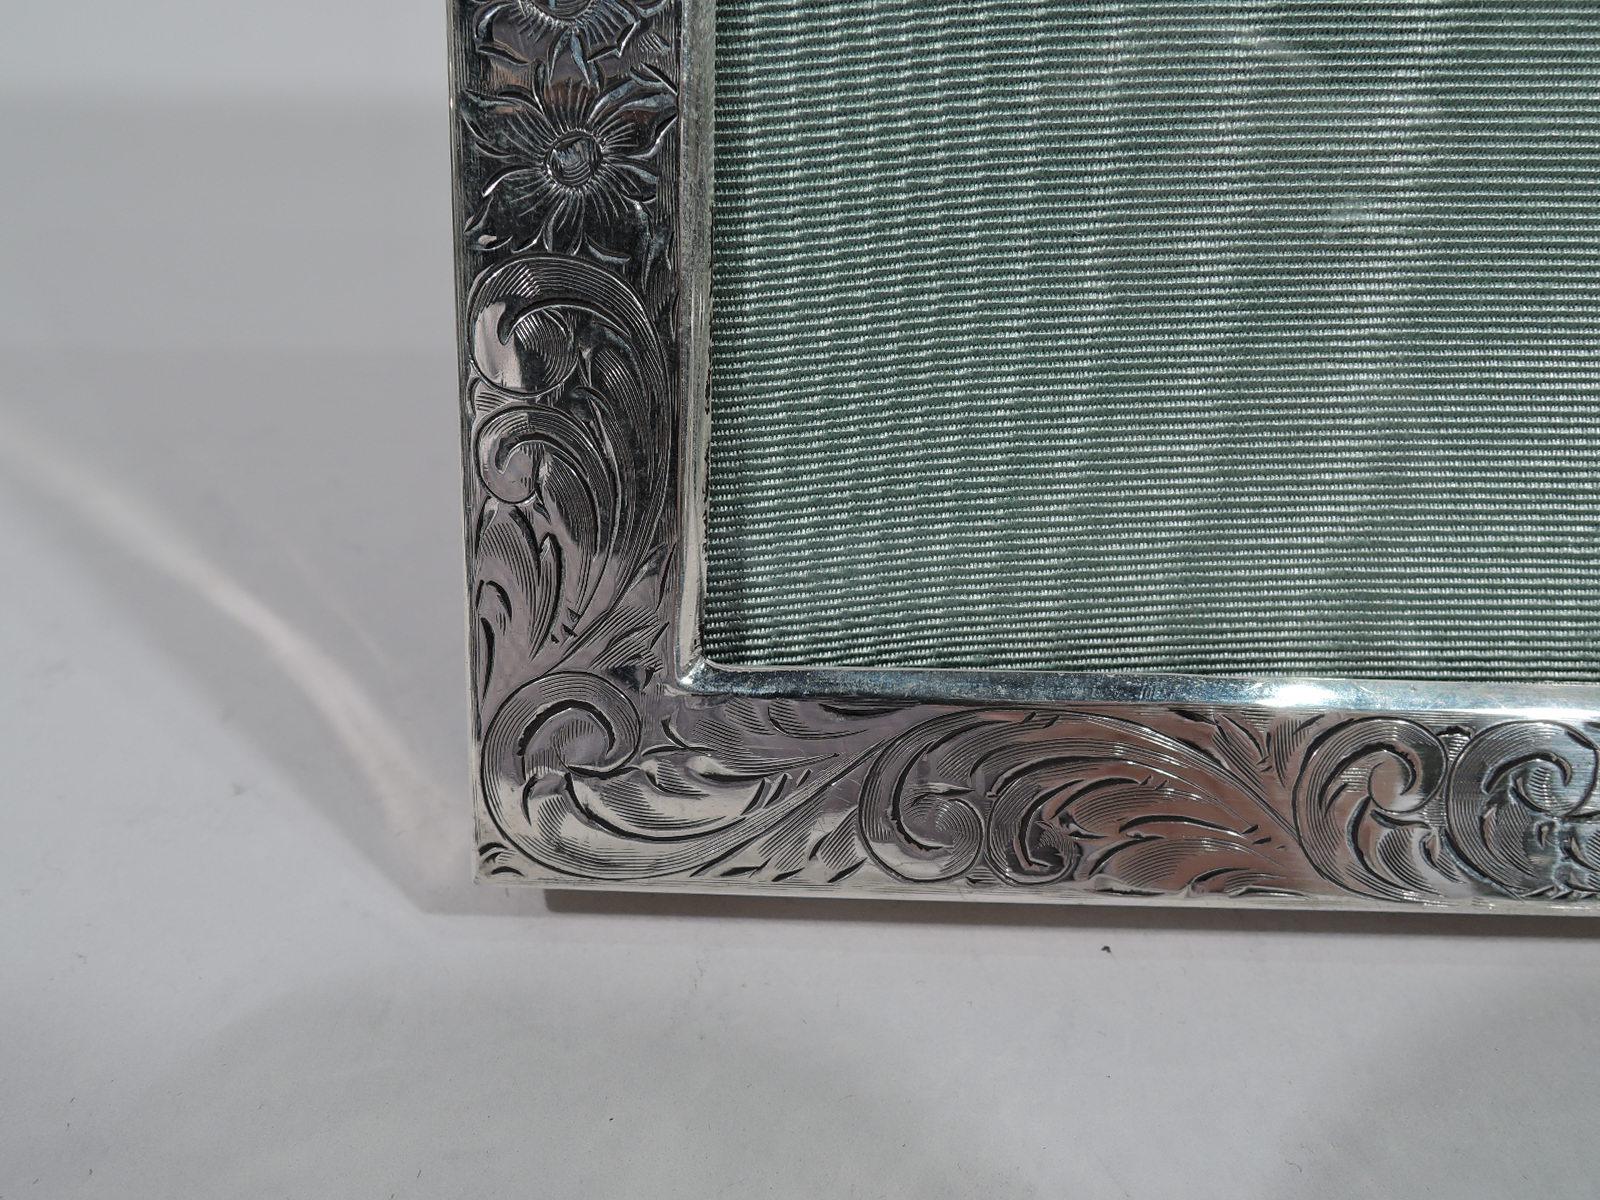 North American Antique American Edwardian Art Nouveau Sterling Silver Picture Frame